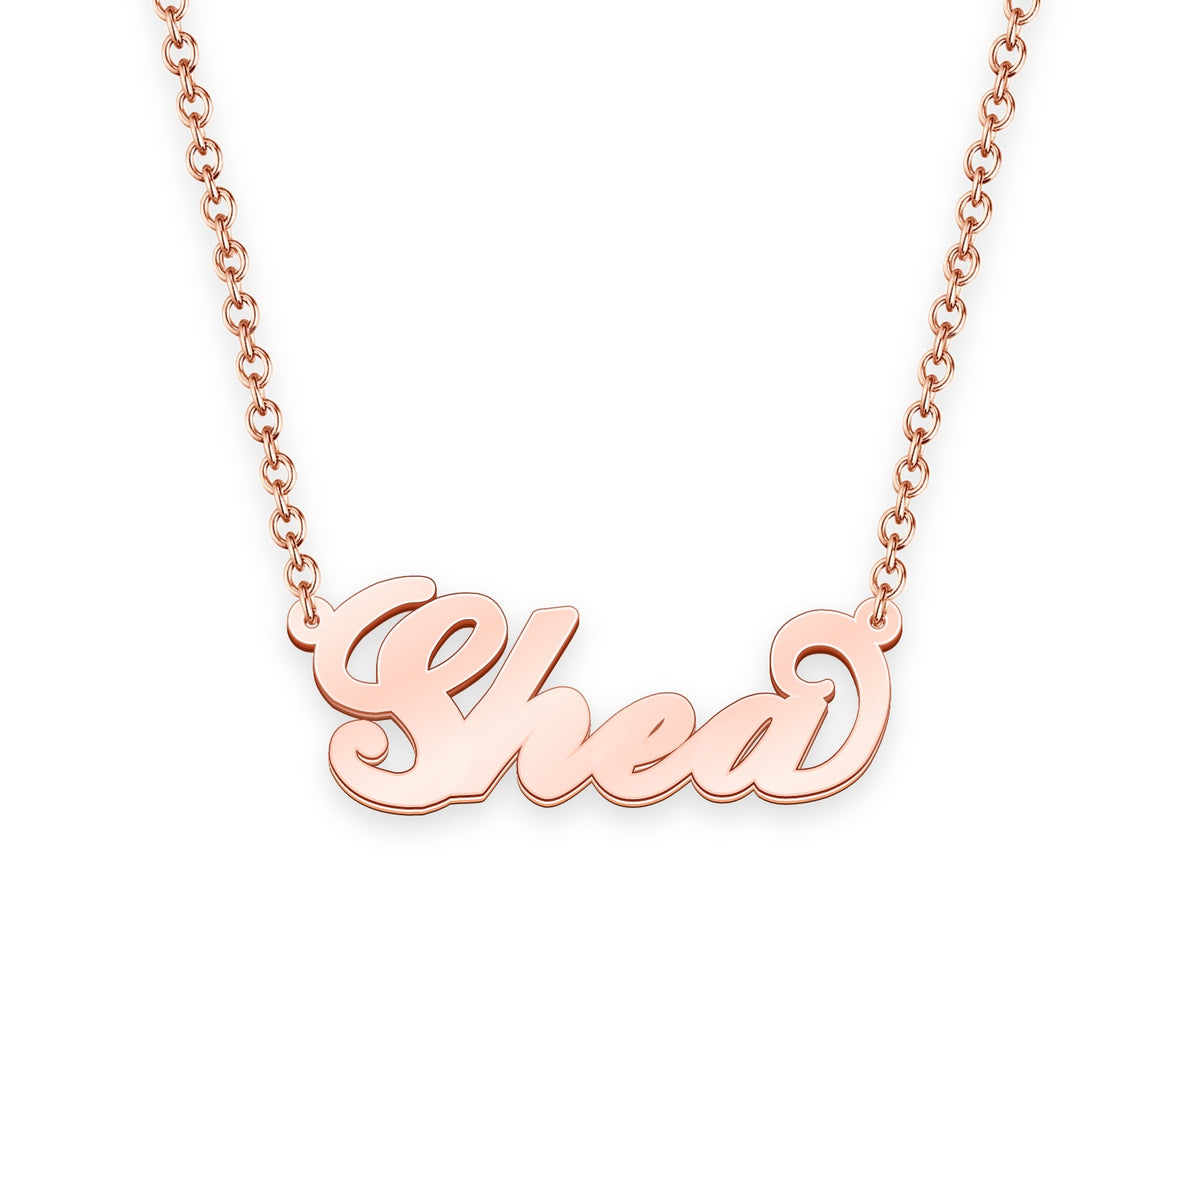 Shea name necklace Gold Custom Necklace, Personalized Gifts For Her – Name  Necklace